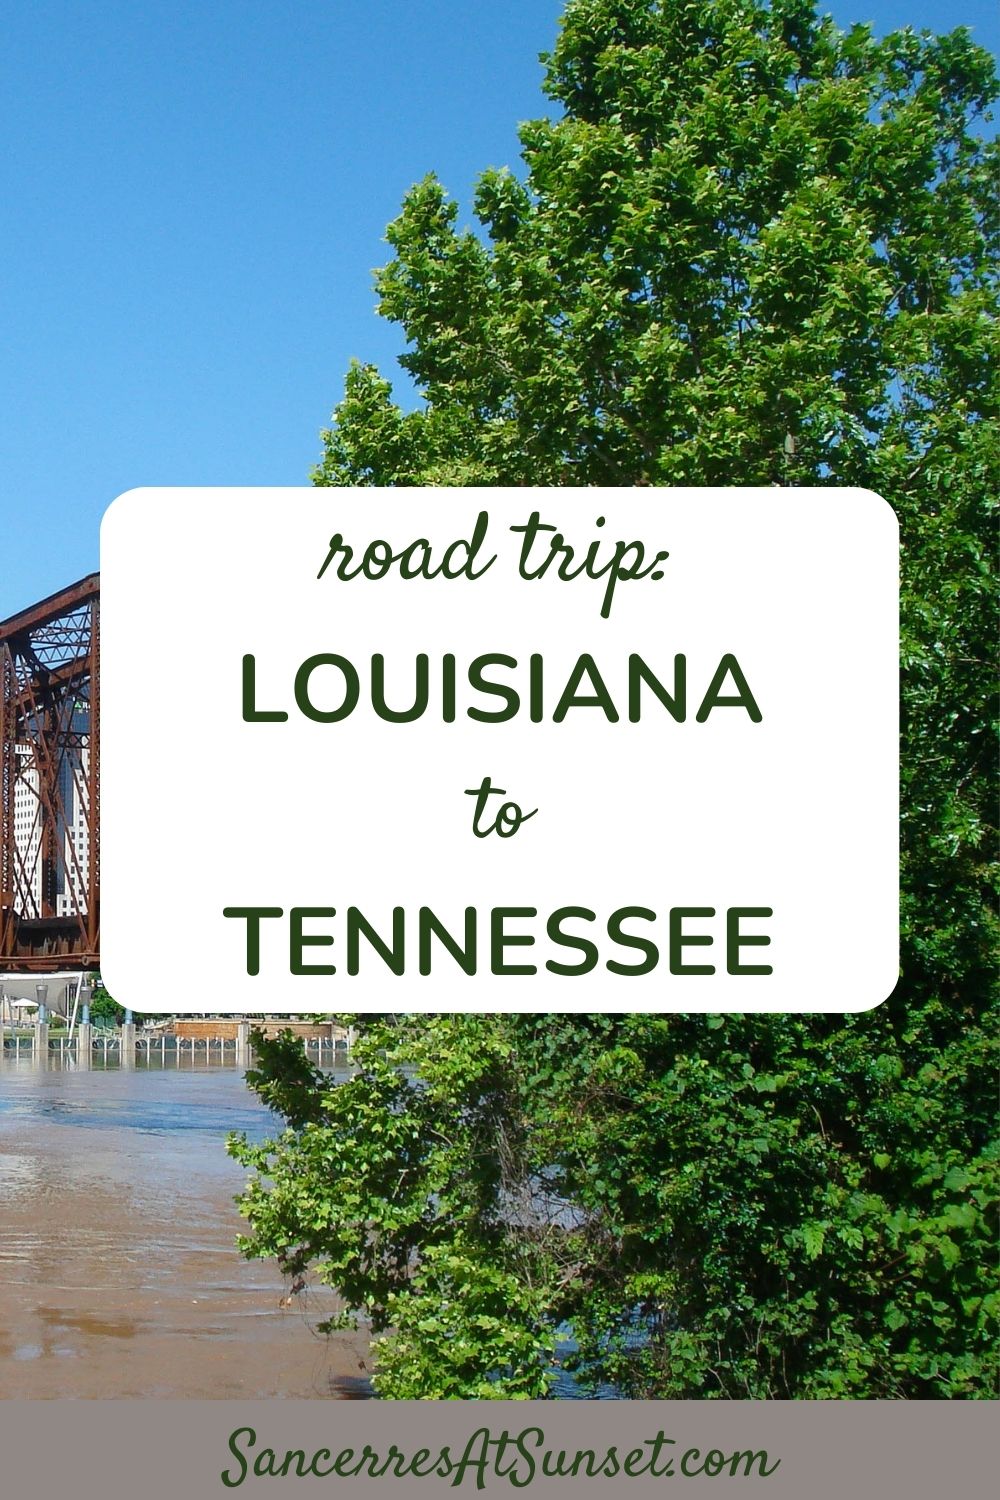 Louisiana to Tennessee -- part 5 of the great American road trip